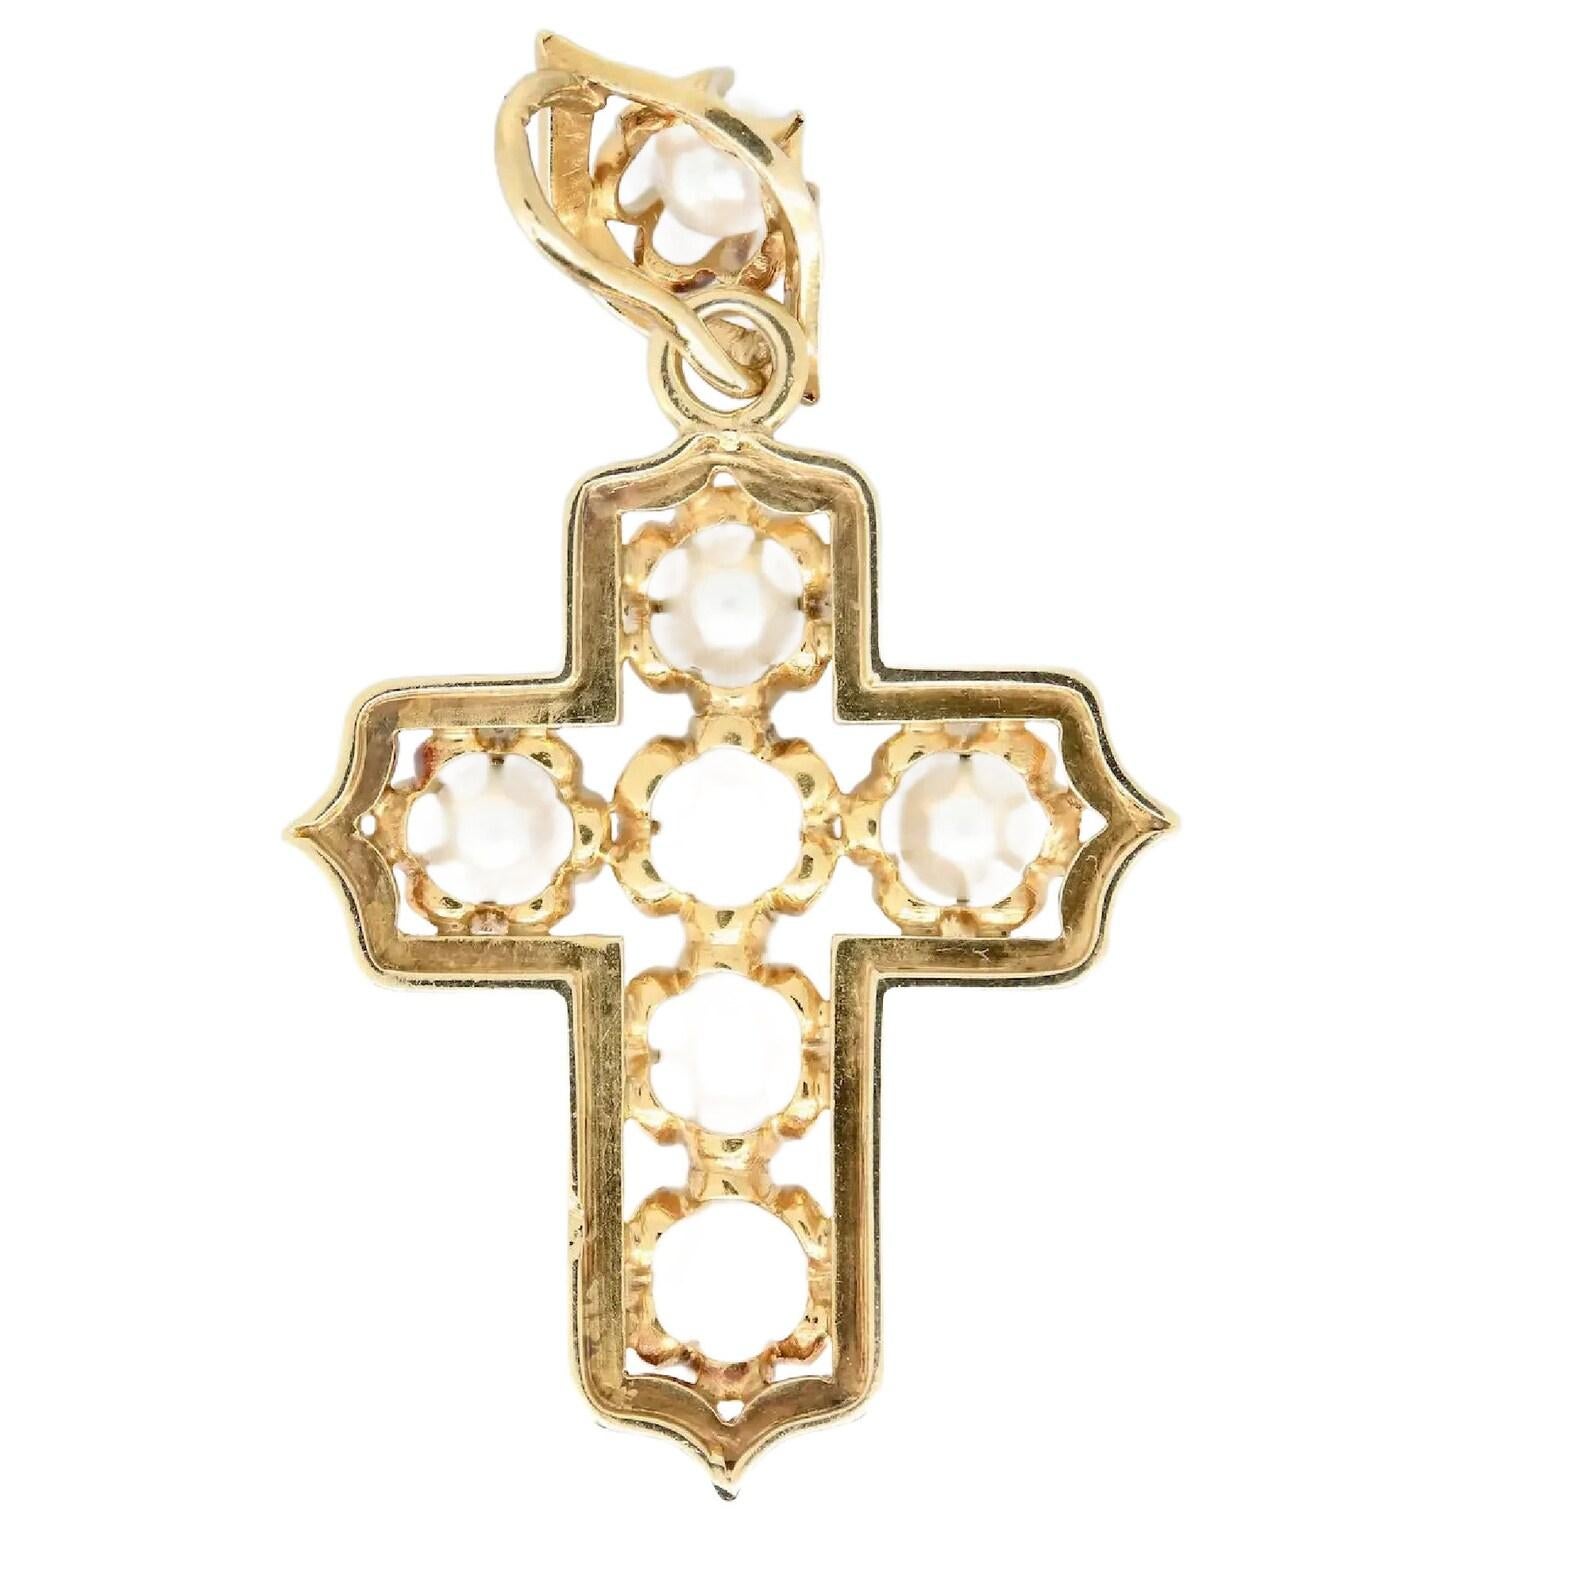 A victorian period hand engraved cross set with seven round white pearls.

Comprised of a pearl set naiveté shaped pendant bale from which suspends an open work cross set with six pearls.

Tested as 18 Karat gold.

Measurements: 2